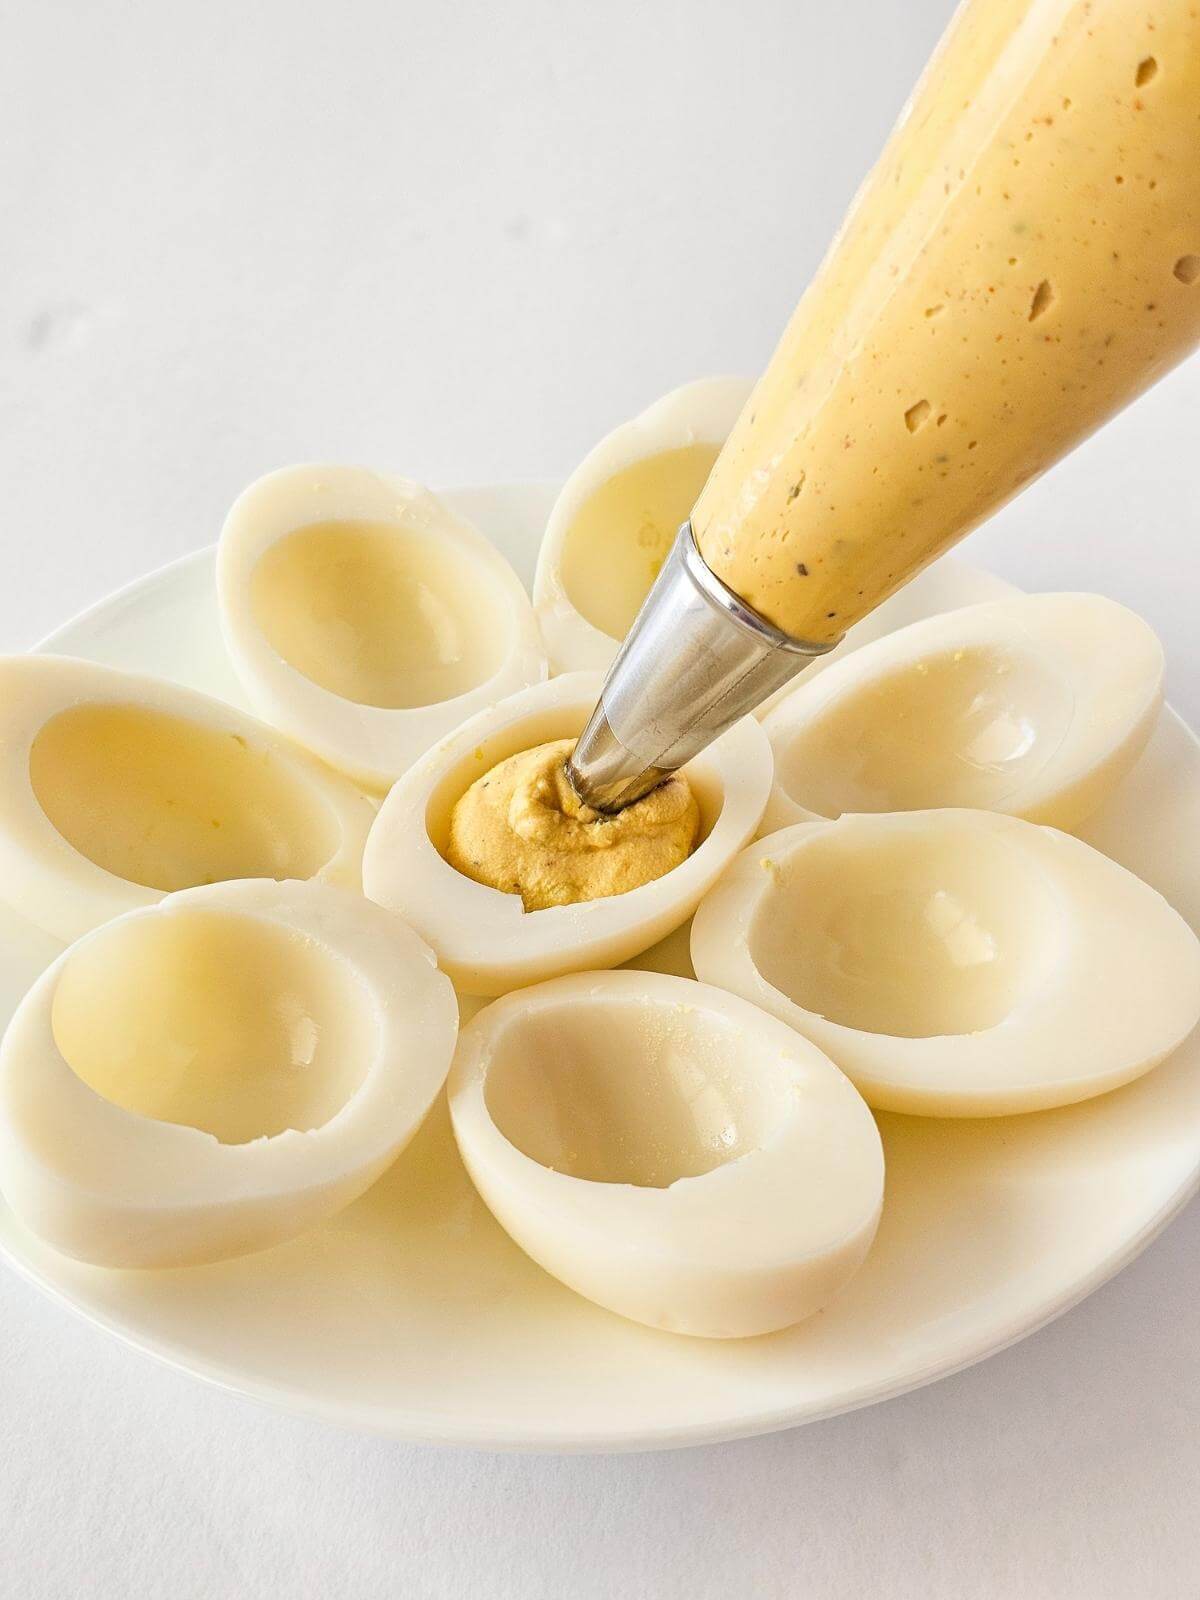 Deviled egg filling piped into hollowed out hard boiled eggs.